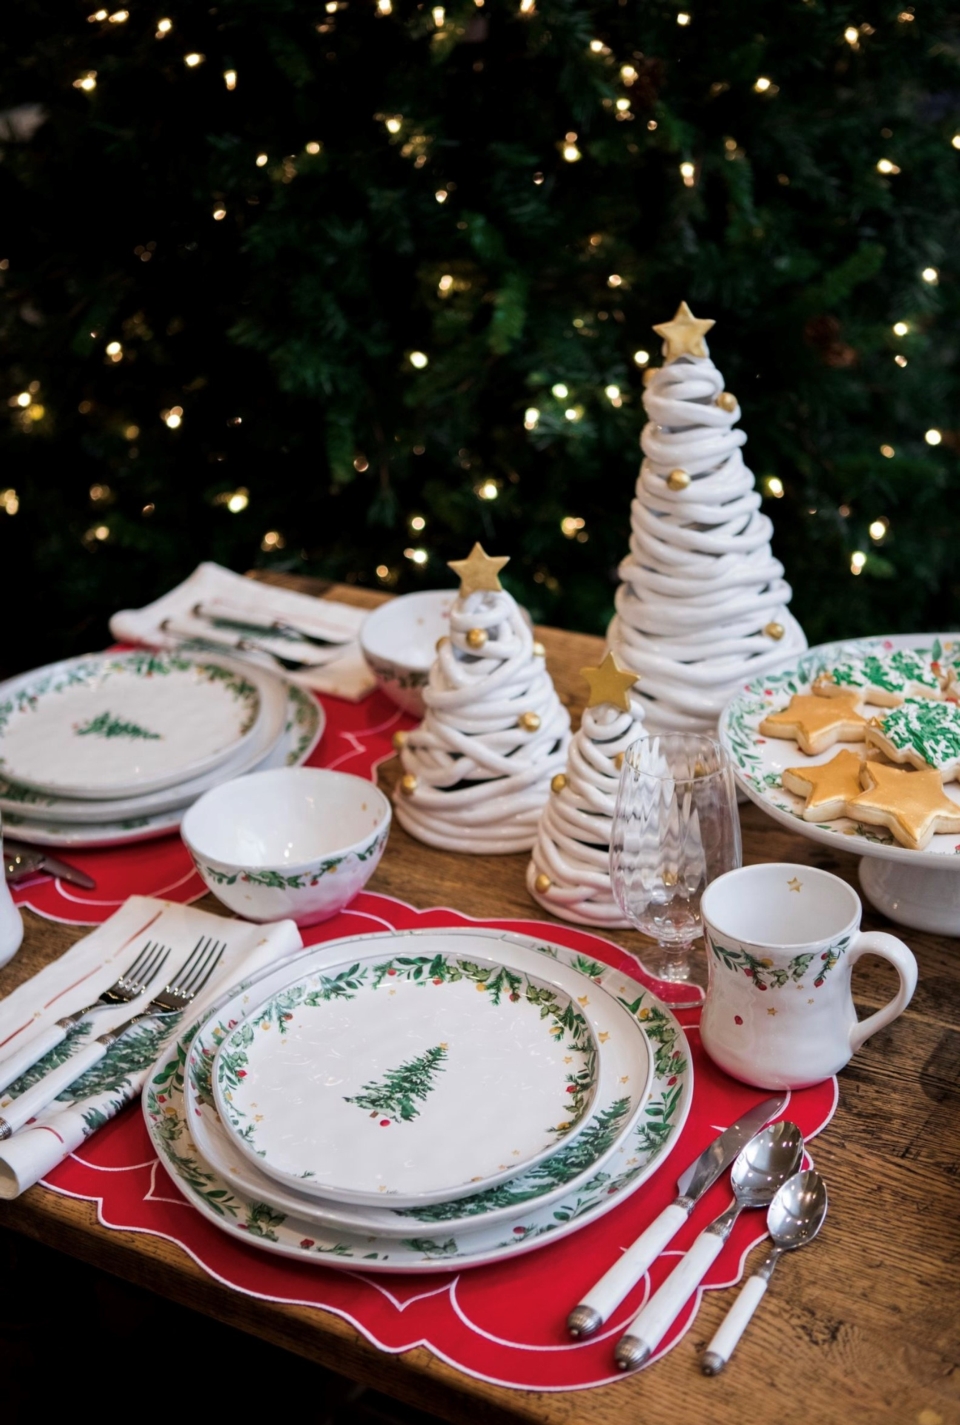 Set a Magical Holiday Table!